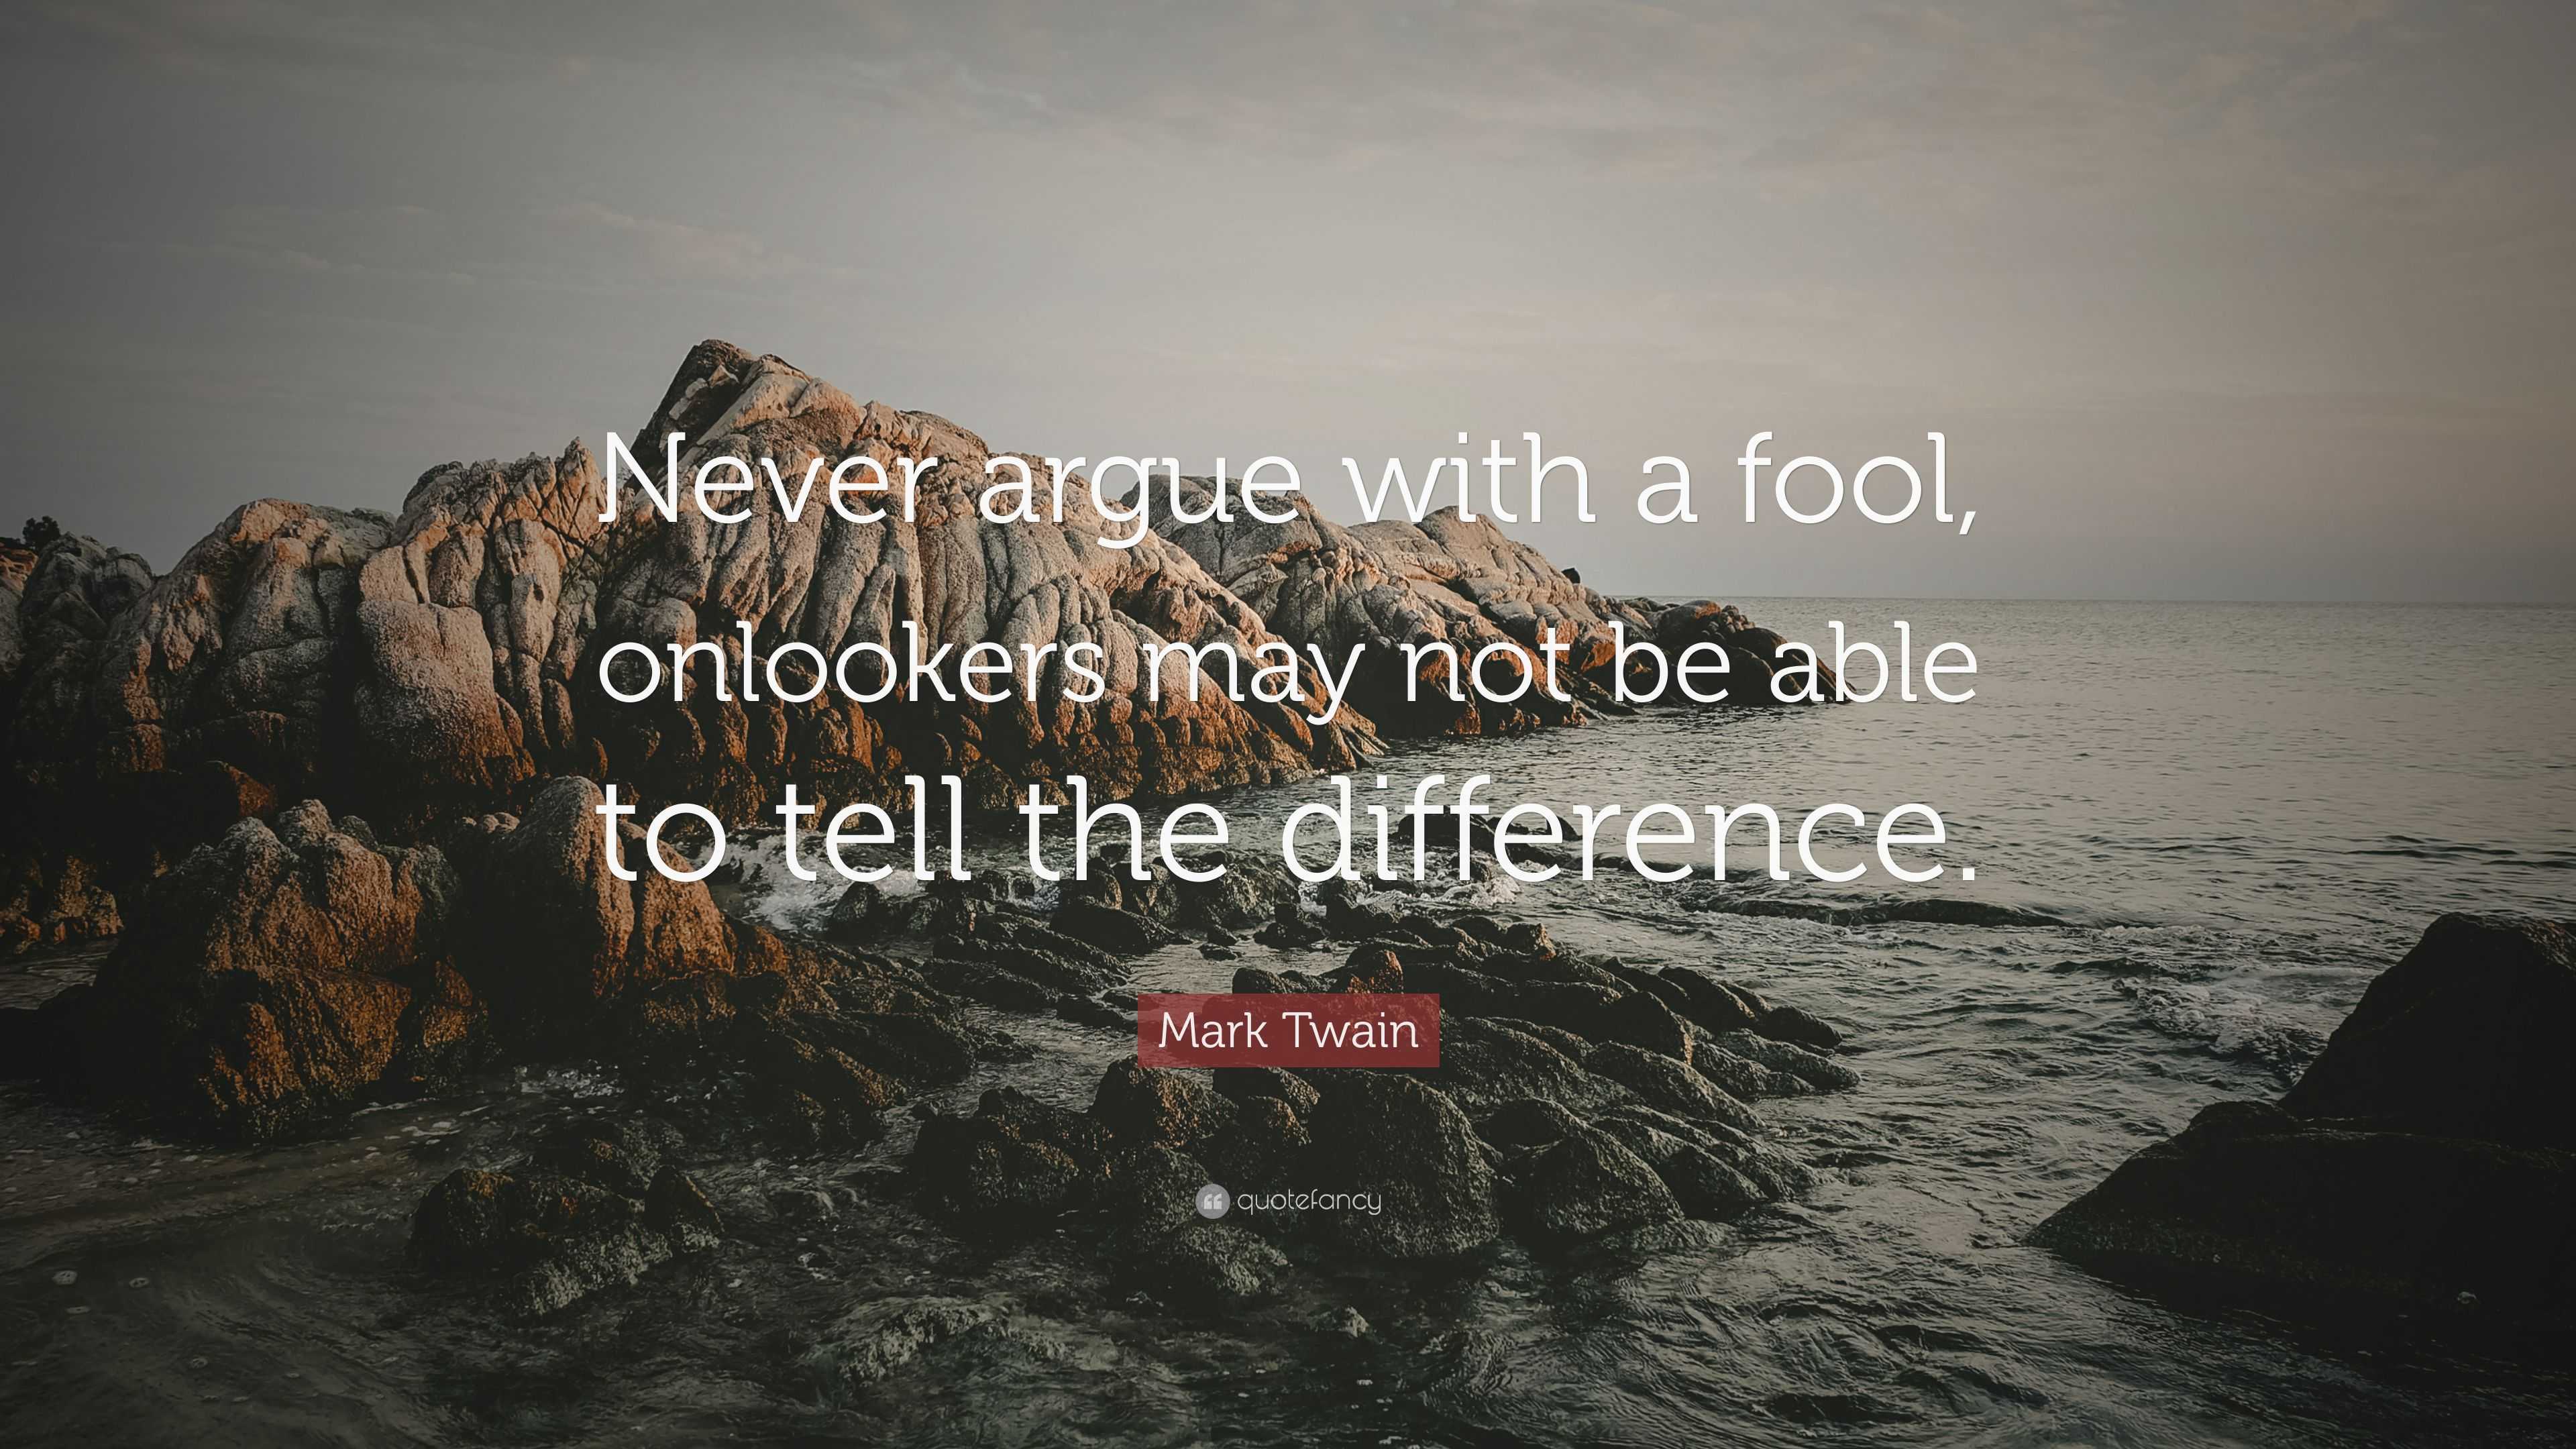 Mark Twain Quote “Never argue with a fool, onlookers may not be able